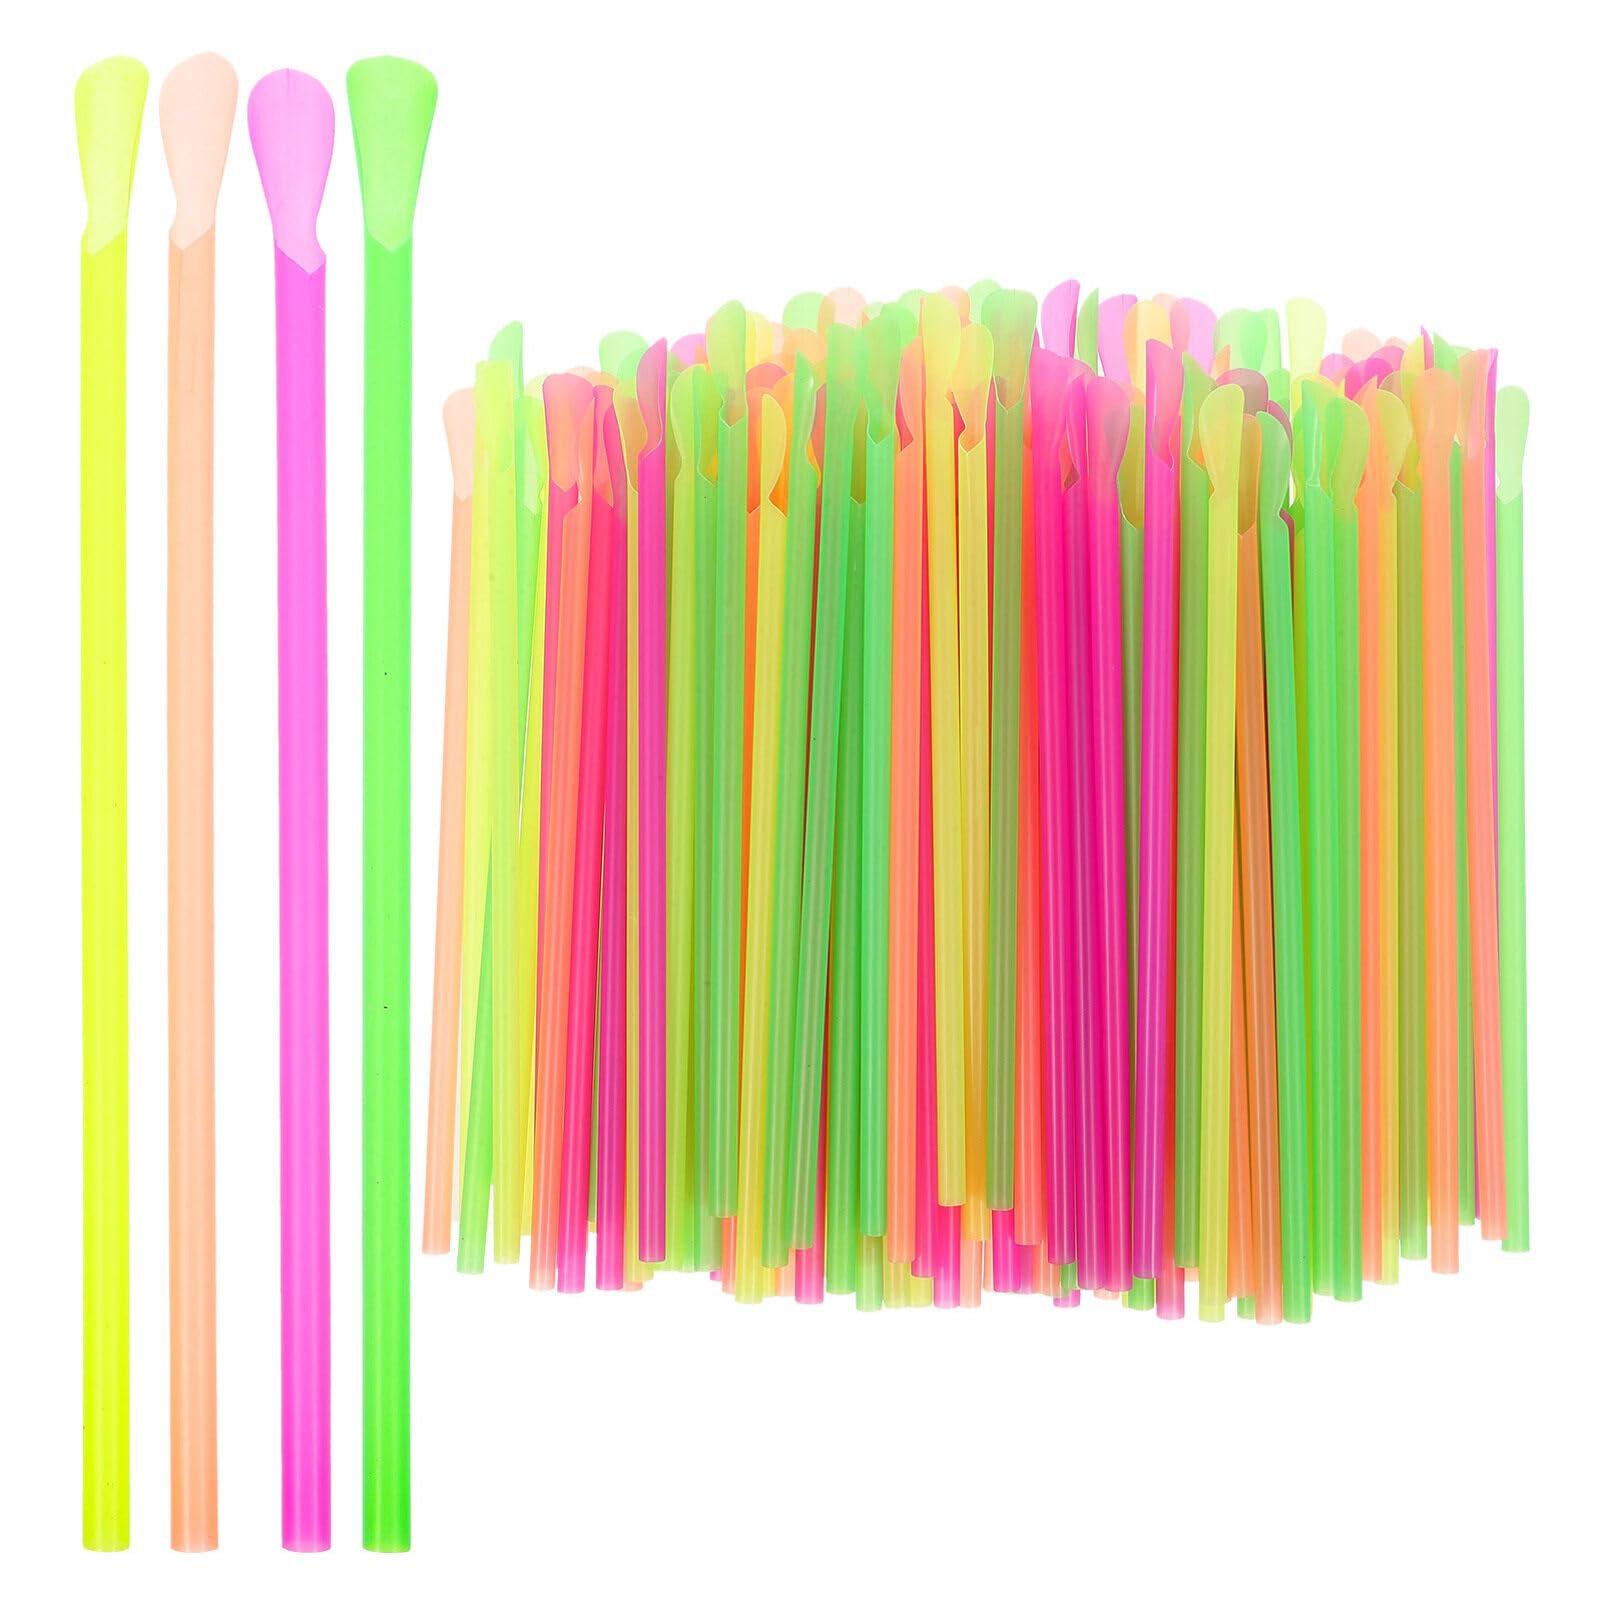 Plastic Straws 150pcs Disposable Spoon Straws Dual Use Drinking Spoon Straw for Milkshakes Shaved Ice (Mixed Color) Straws Disposable